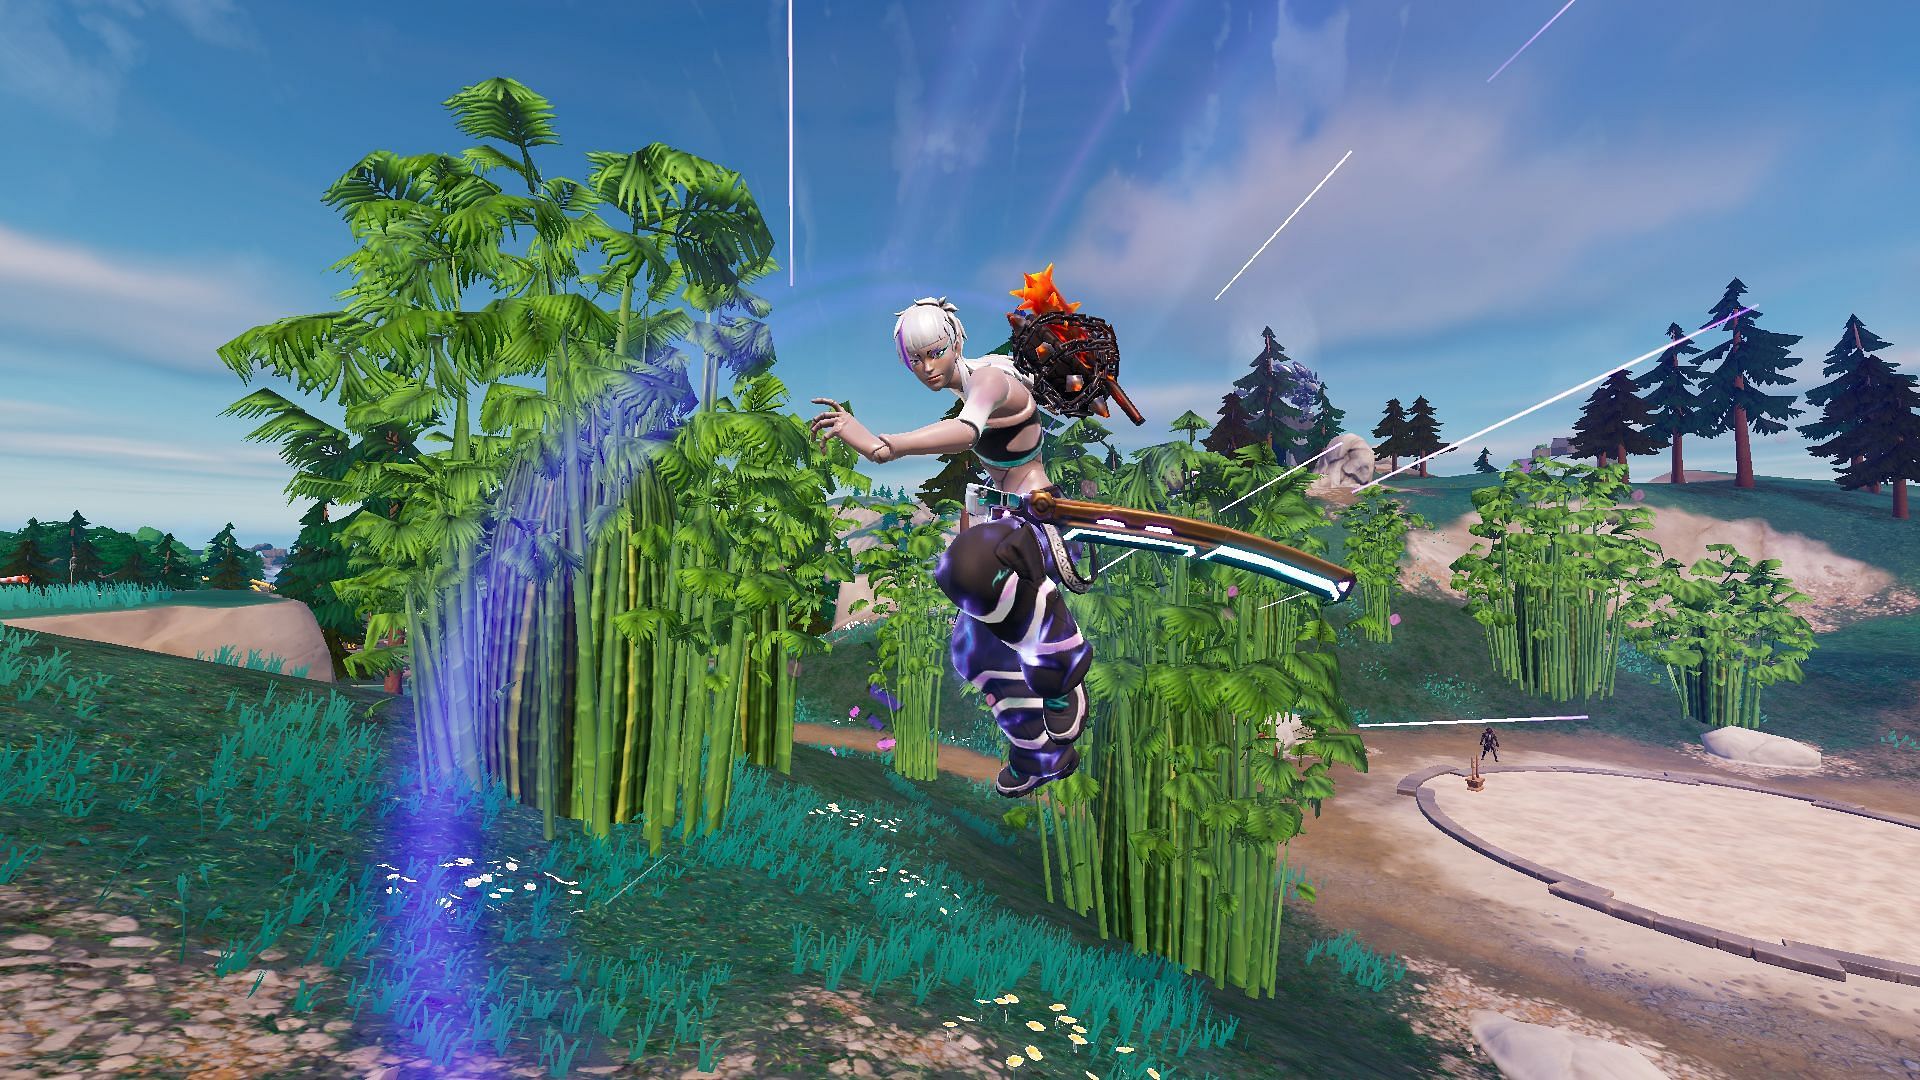 Yes, the Kinetic Blade is coming back to Fortnite Chapter 4 Season 4 (Image via Epic Games/Fortnite)